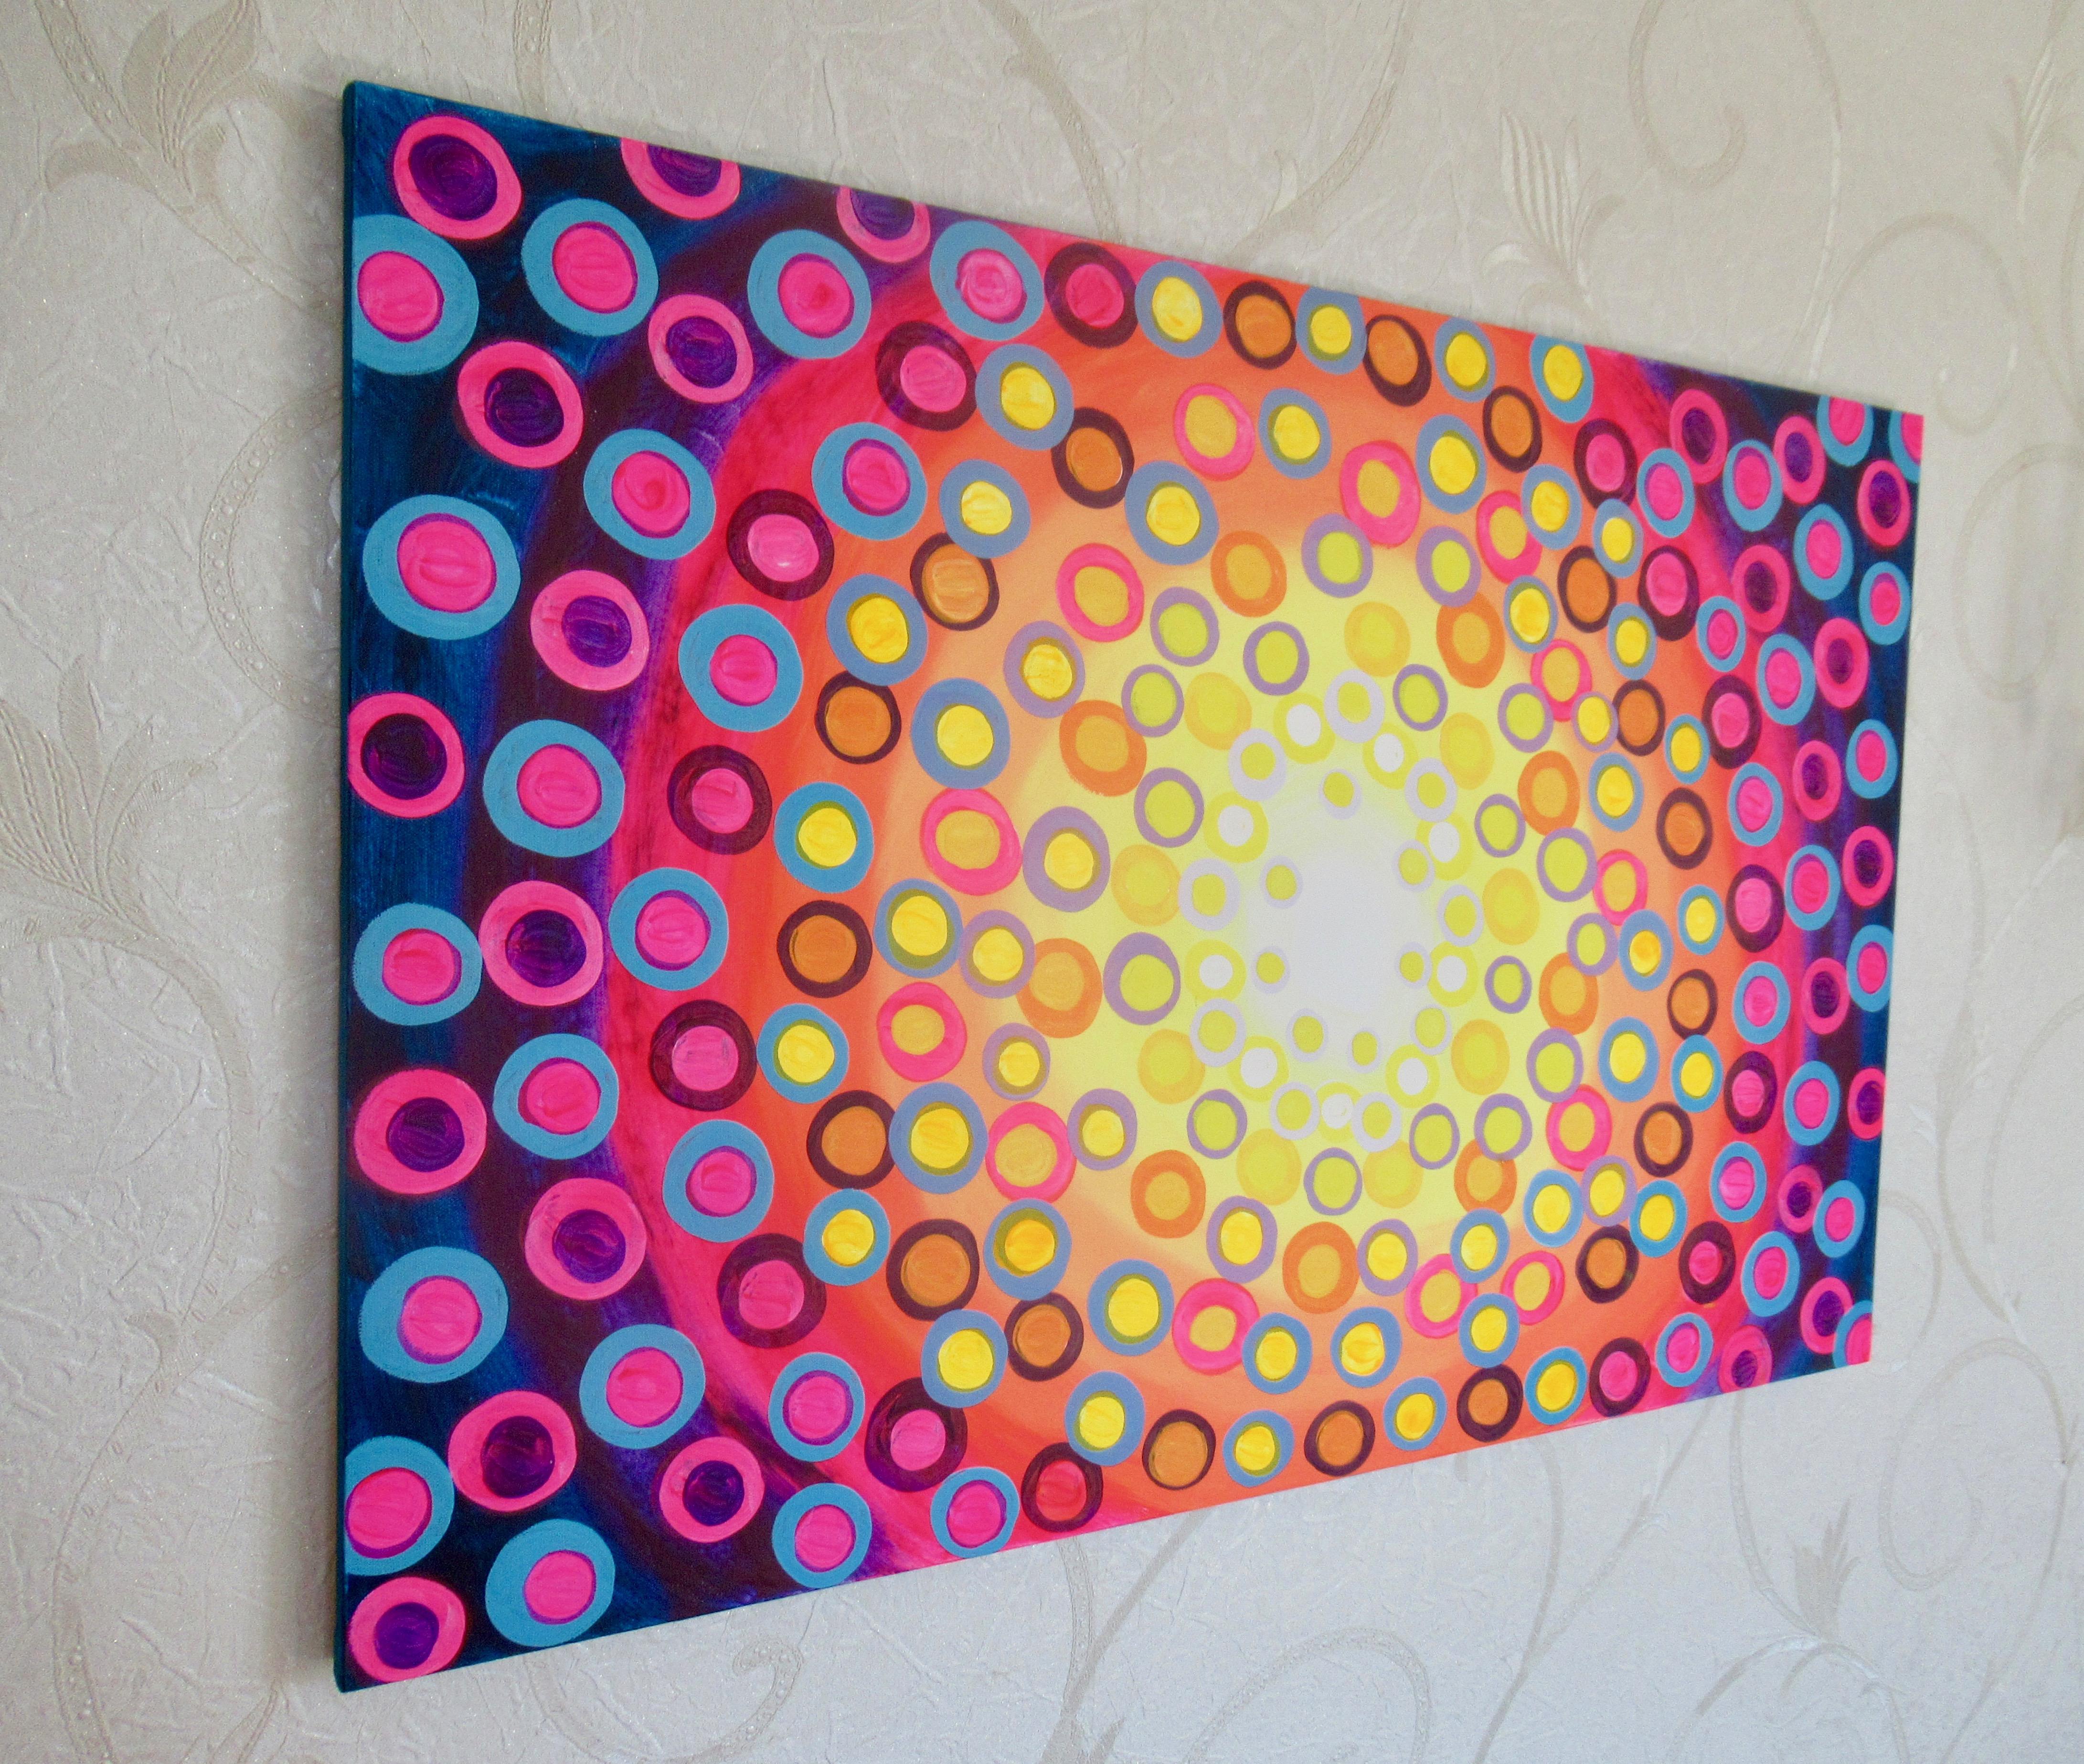 <p>Artist Comments<br />A burst of vibrant colors emerges from the brightly glowing sun. Part of artist Natasha Tayles's signature Circles series. Lively shades of pinks, orange, and blues radiate life and a fun-loving spirit.</p><br /><p>About the